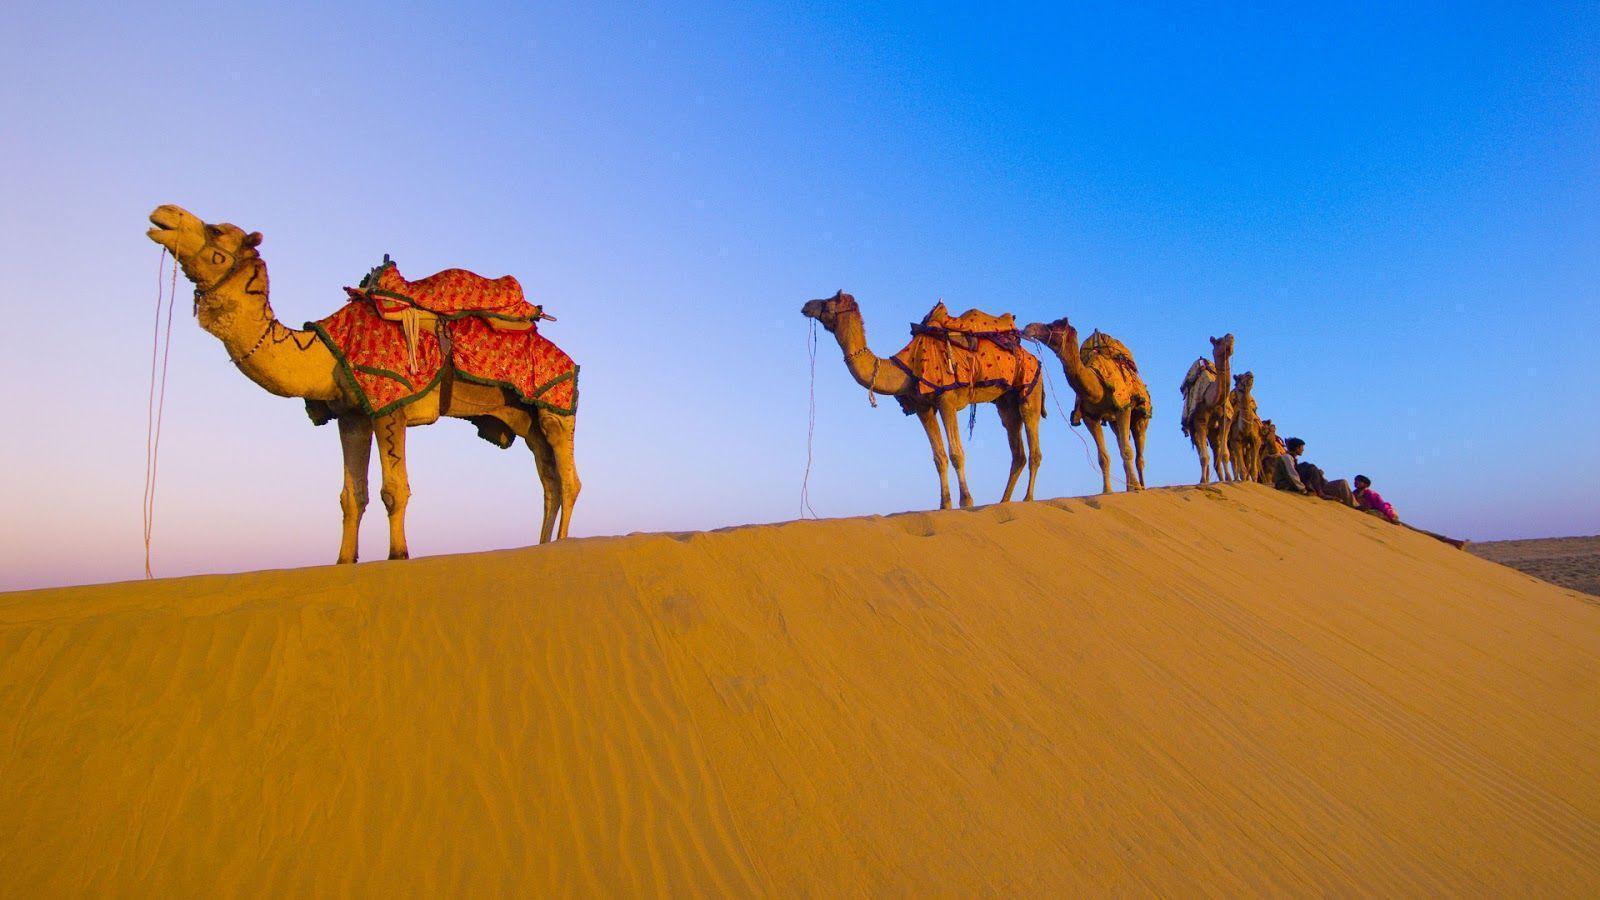 Camel Animals Photo, Image, Picture, Full HD Wallpaper Gallery